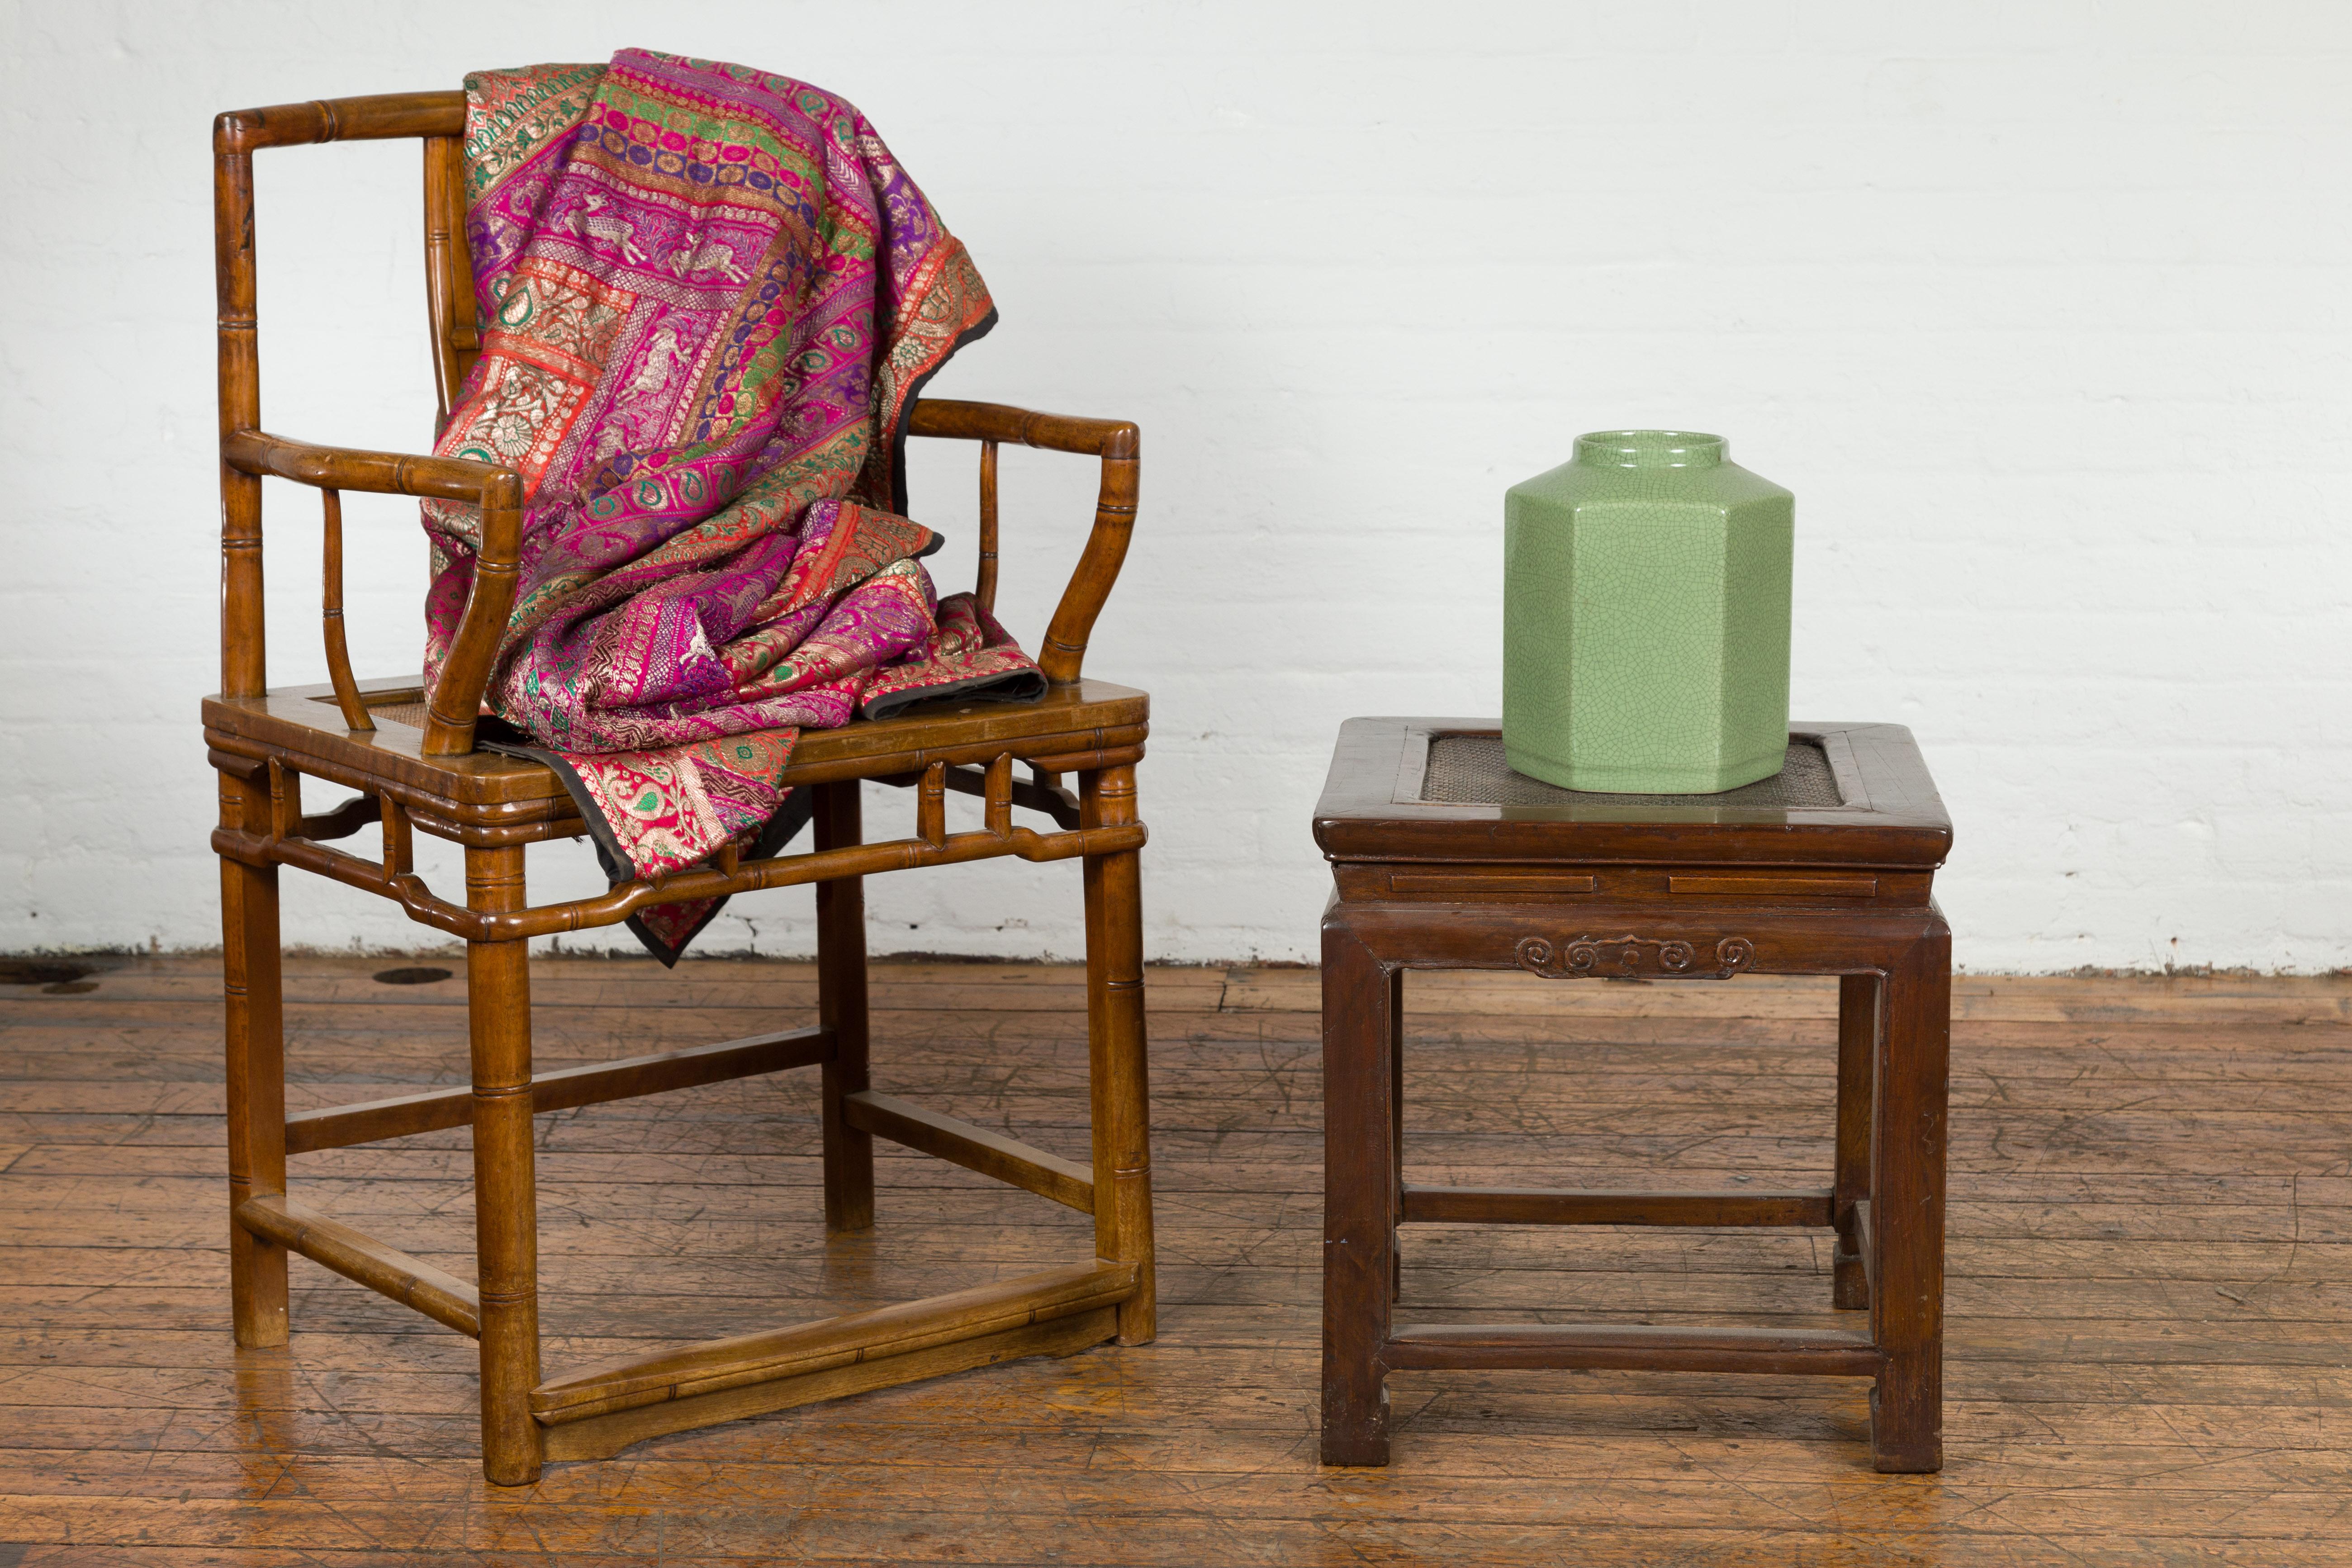 A late Qing Dynasty period wooden side table from the early 20th century with rattan inset top, scroll-carved apron and horsehoof feet. A poignant testament to craftsmanship from the late Qing Dynasty, this wooden side table is not just furniture